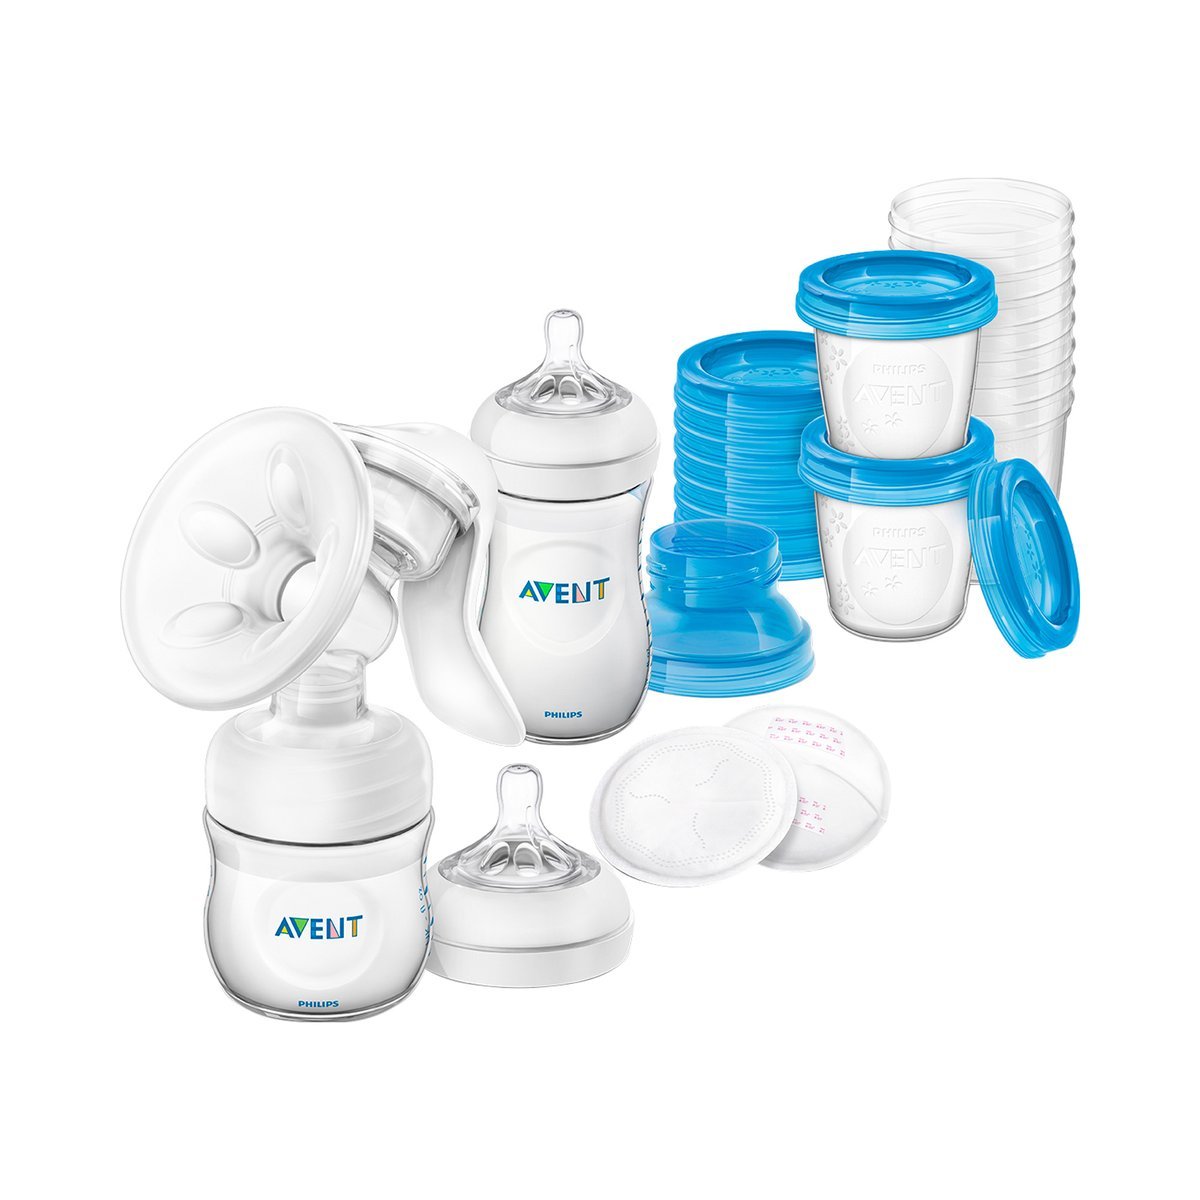 Philips AVENT Manual breast pump, SCD221/00 Breastfeeding Set with Life-like Bottle Storage Cups and Breast Pads Colour One Size